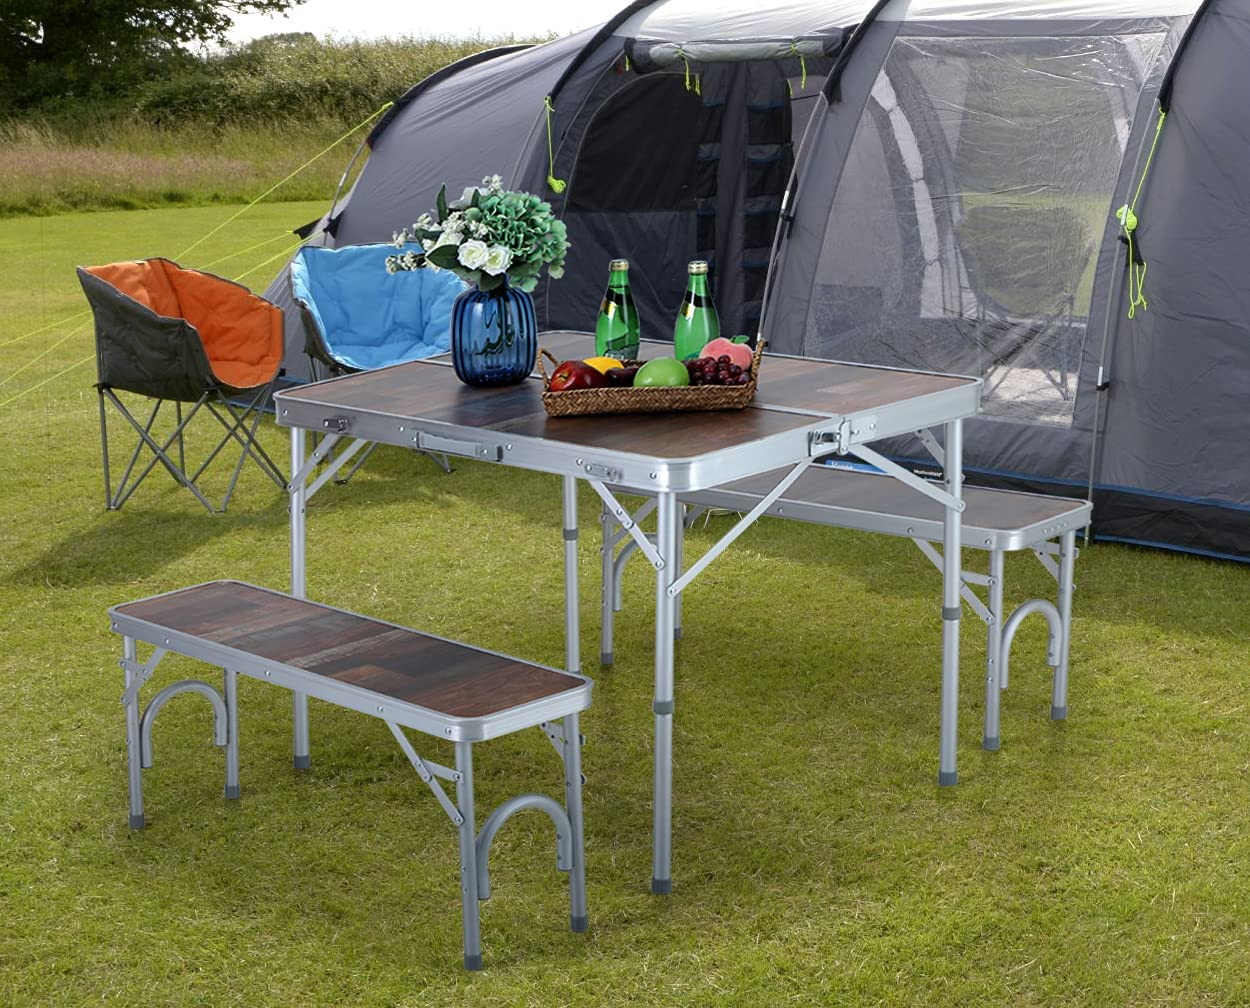 3PCS Folding Table and Benches Set 4FT Aluminum Camping Table Portable Picnic Dining Table Lightweight Folding Card Table W/Handle for Indoor Outdoor Patio Backyard Party